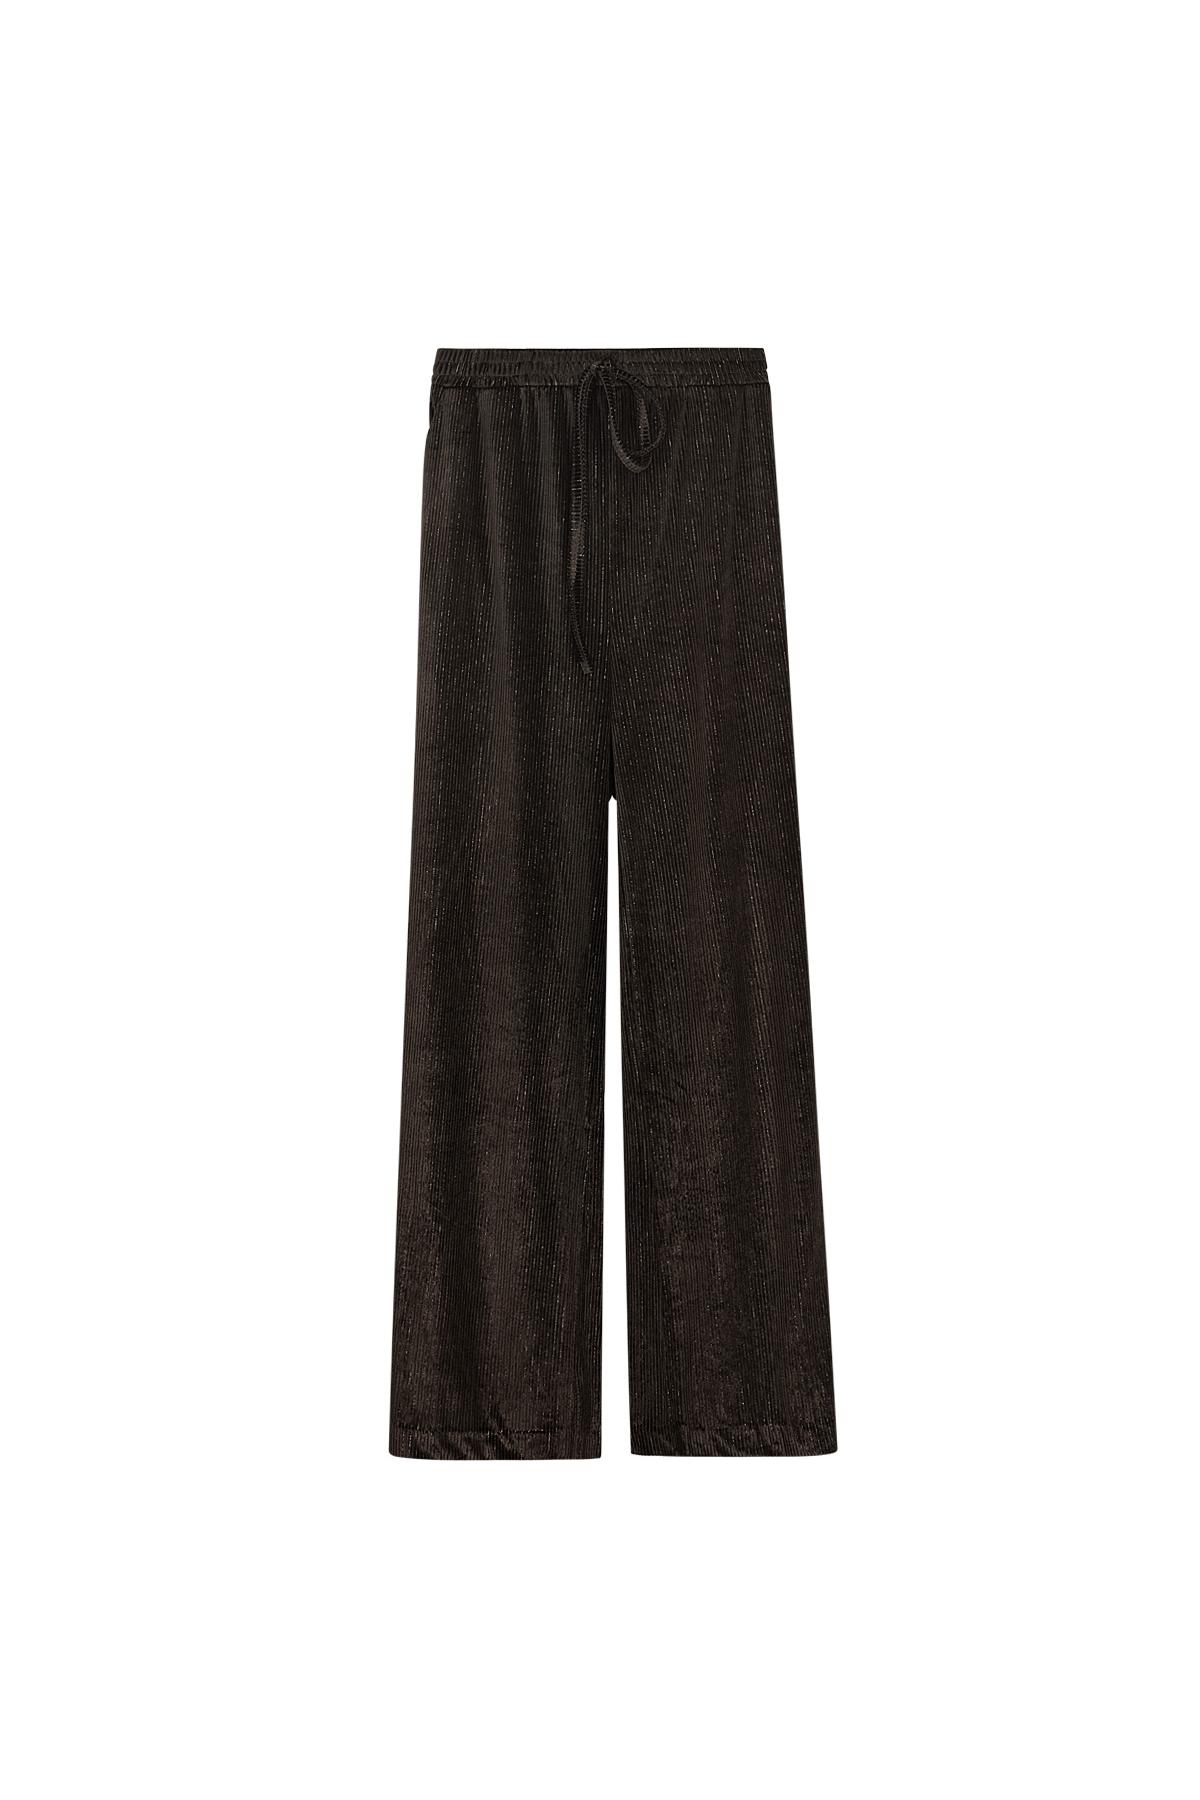 Pants rib with glitter Brown M h5 